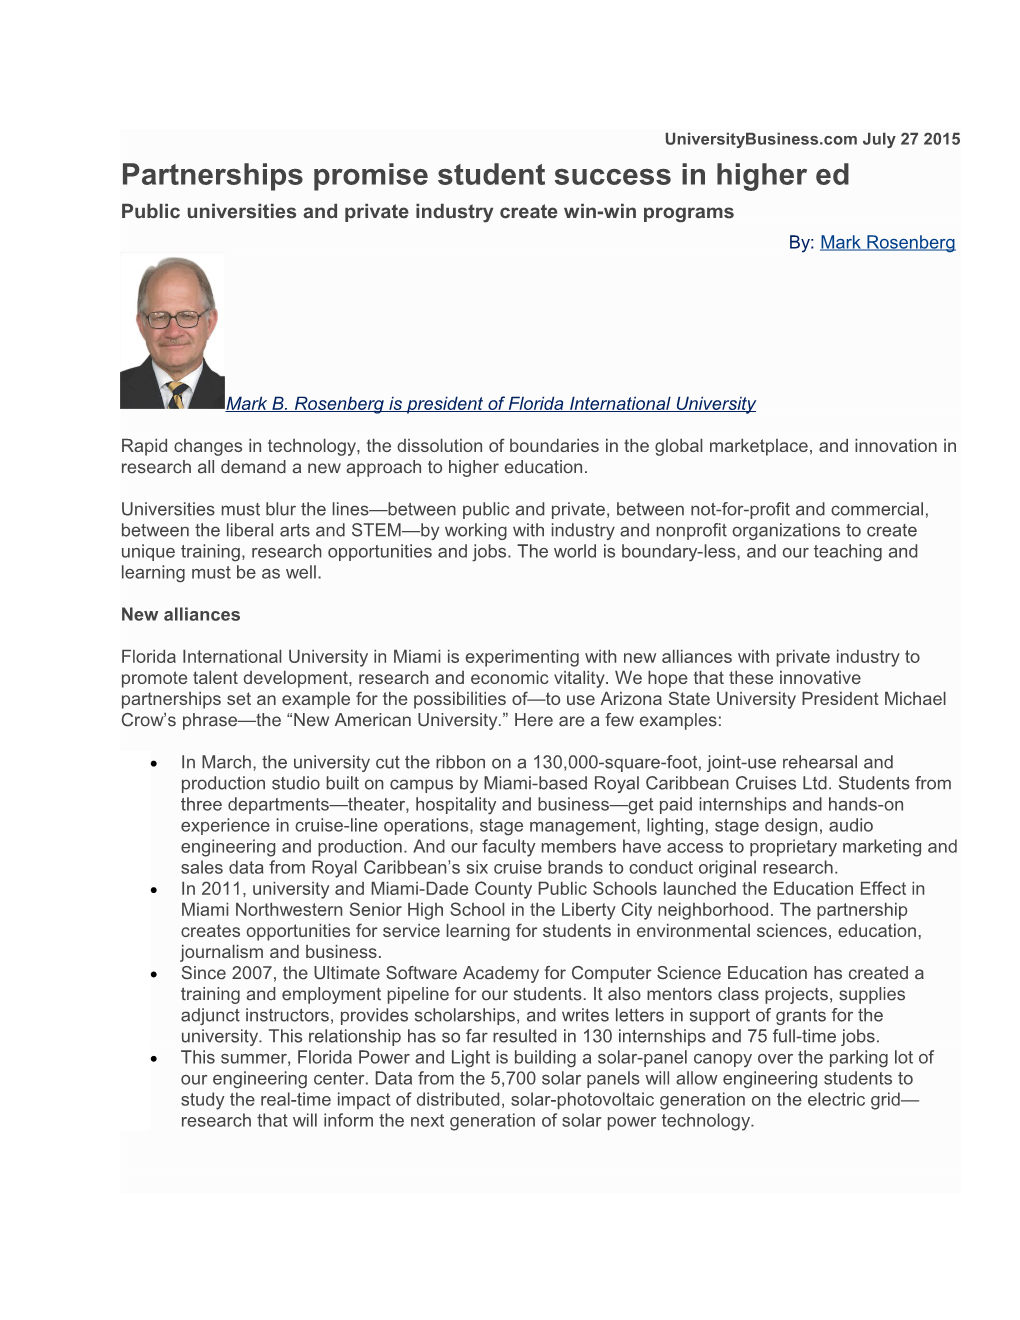 Partnerships Promise Student Success in Higher Ed